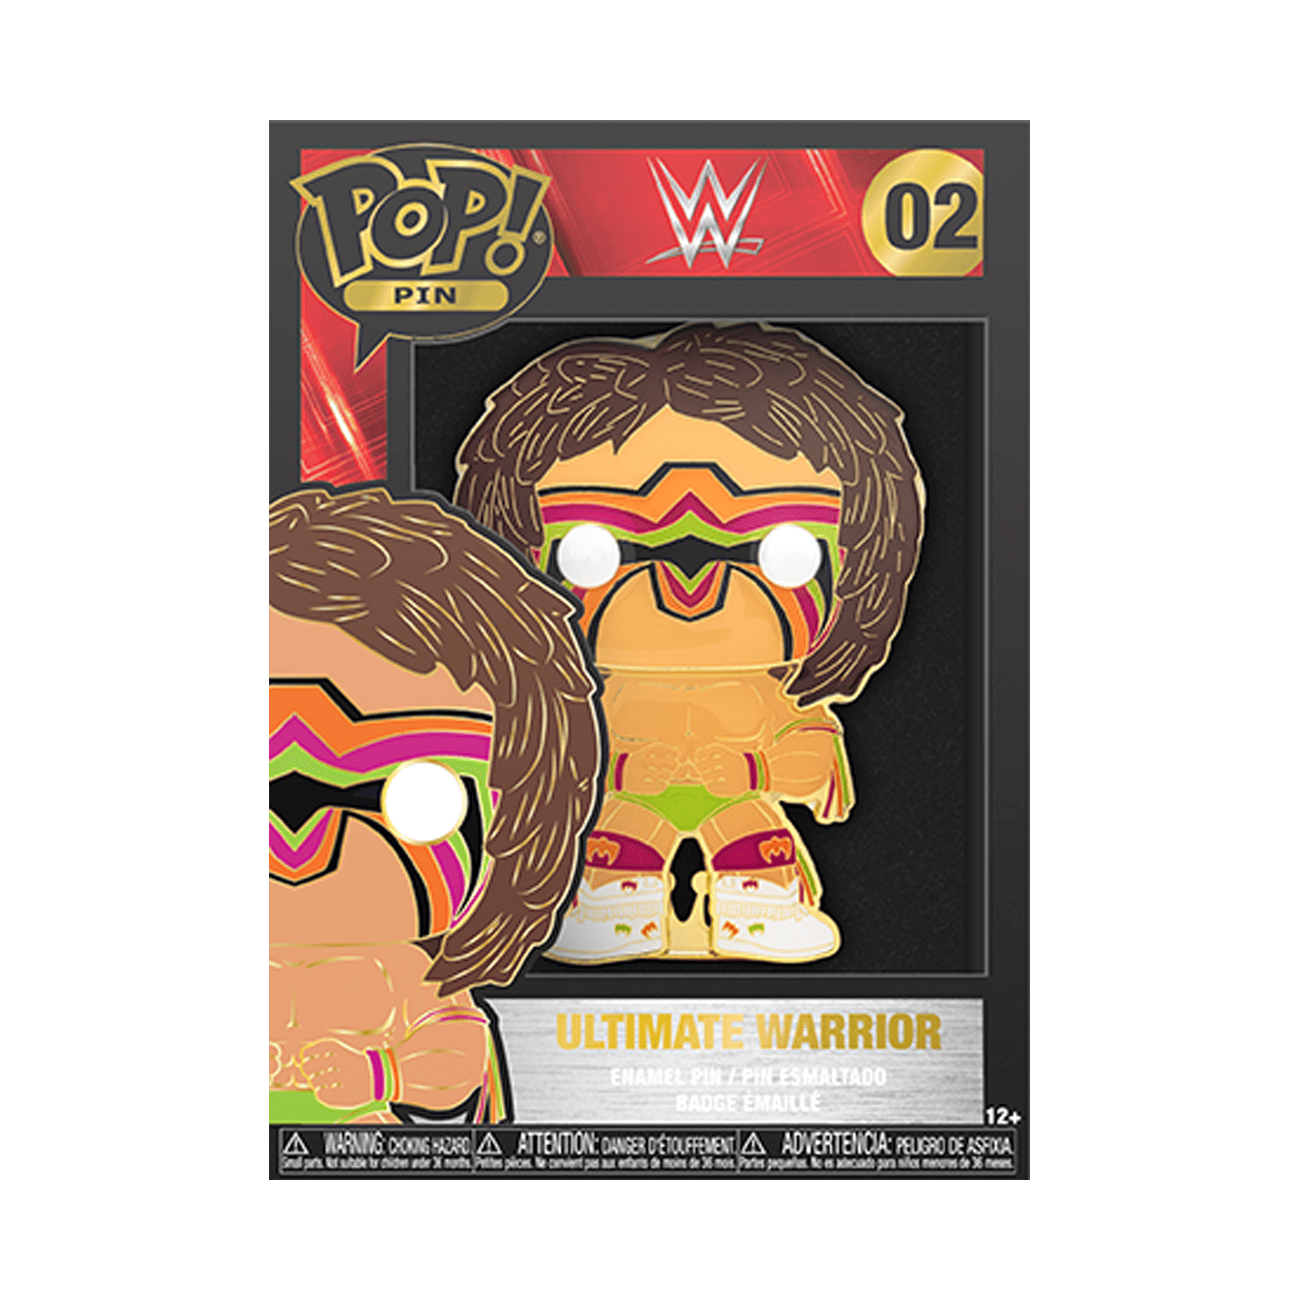 Pop! Pin Ultimate Warrior By Funko